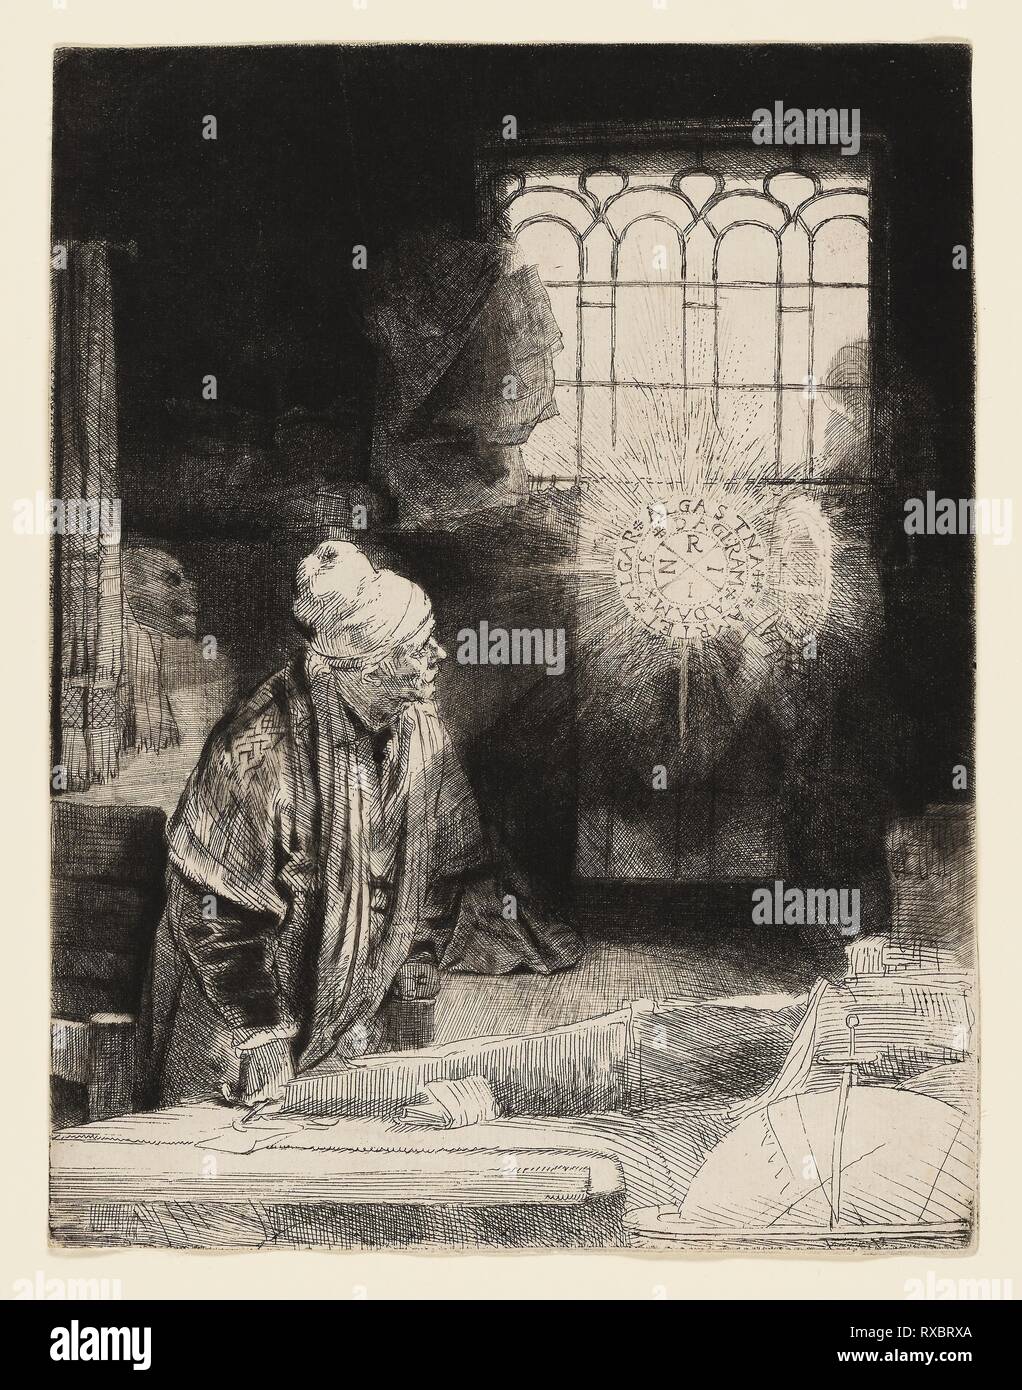 A Scholar in His Study (Faust). Rembrandt van Rijn; Dutch, 1606-1669. Date: 1647-1657. Dimensions: 210 x 161 mm (image/plate). Etching, drypoint and engraving on white laid paper. Origin: Holland. Museum: The Chicago Art Institute. Author: REMBRANDT HARMENSZOON VAN RIJN. HARMENSZOON VAN RIJN REMBRANDT. Rembrandt van Rhijn. MEPHISTOPHELES. Stock Photo